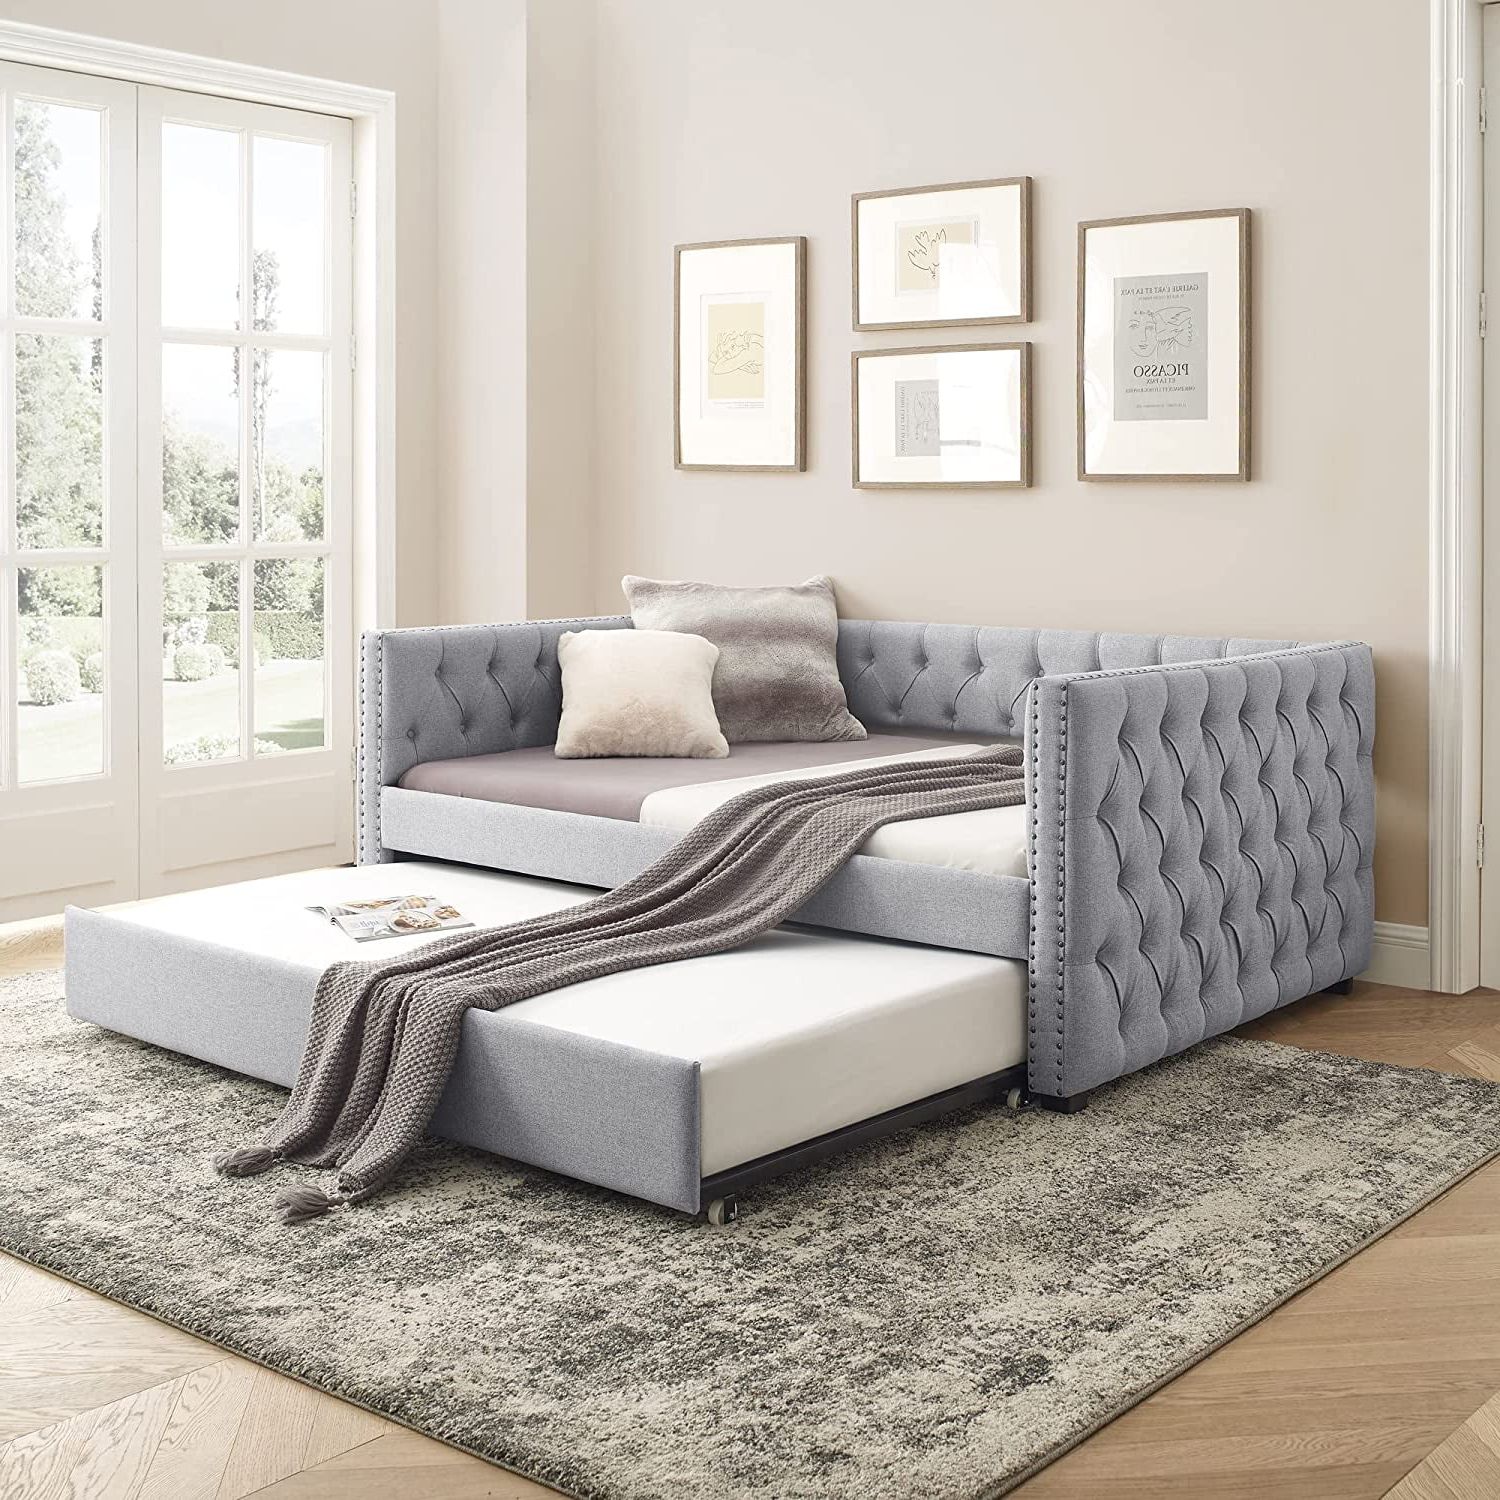 Famous 2 In 1 Gray Pull Out Sofa Beds Intended For Daybed With Trundle, Muumblus Modren Adult Pull Out Sofa Bed For (View 10 of 15)